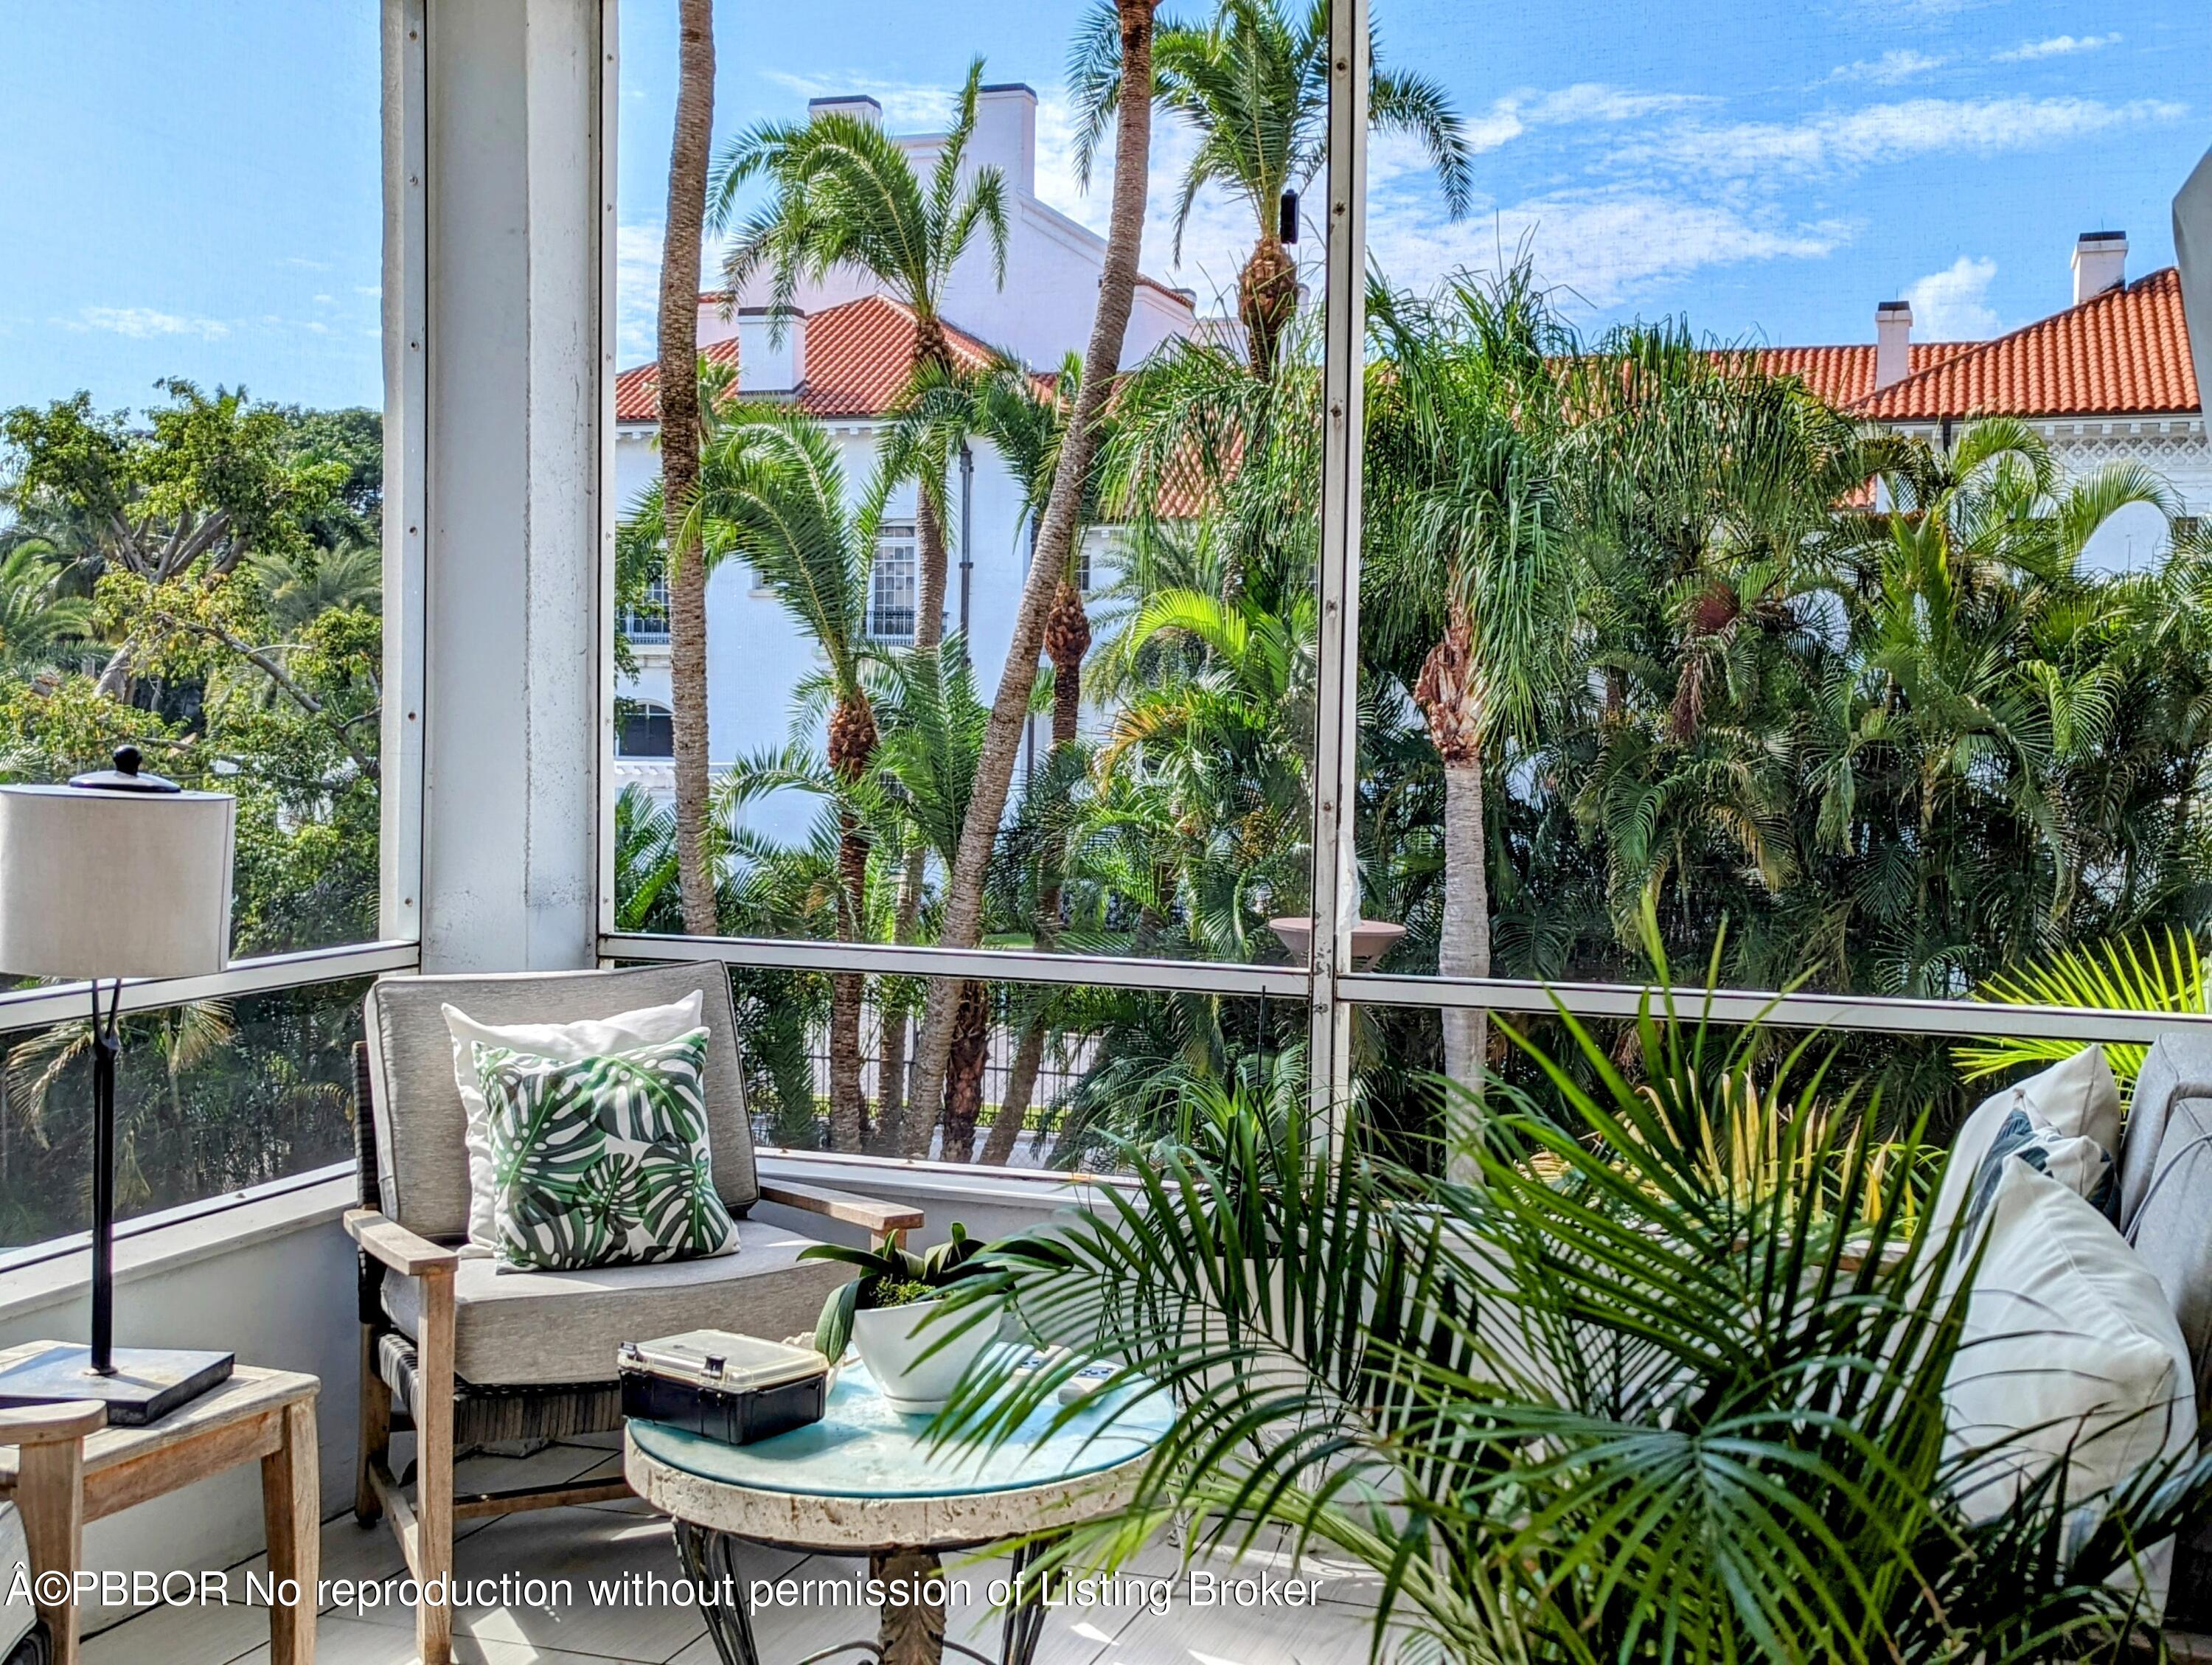 Flagler Museum Views from your Lanai